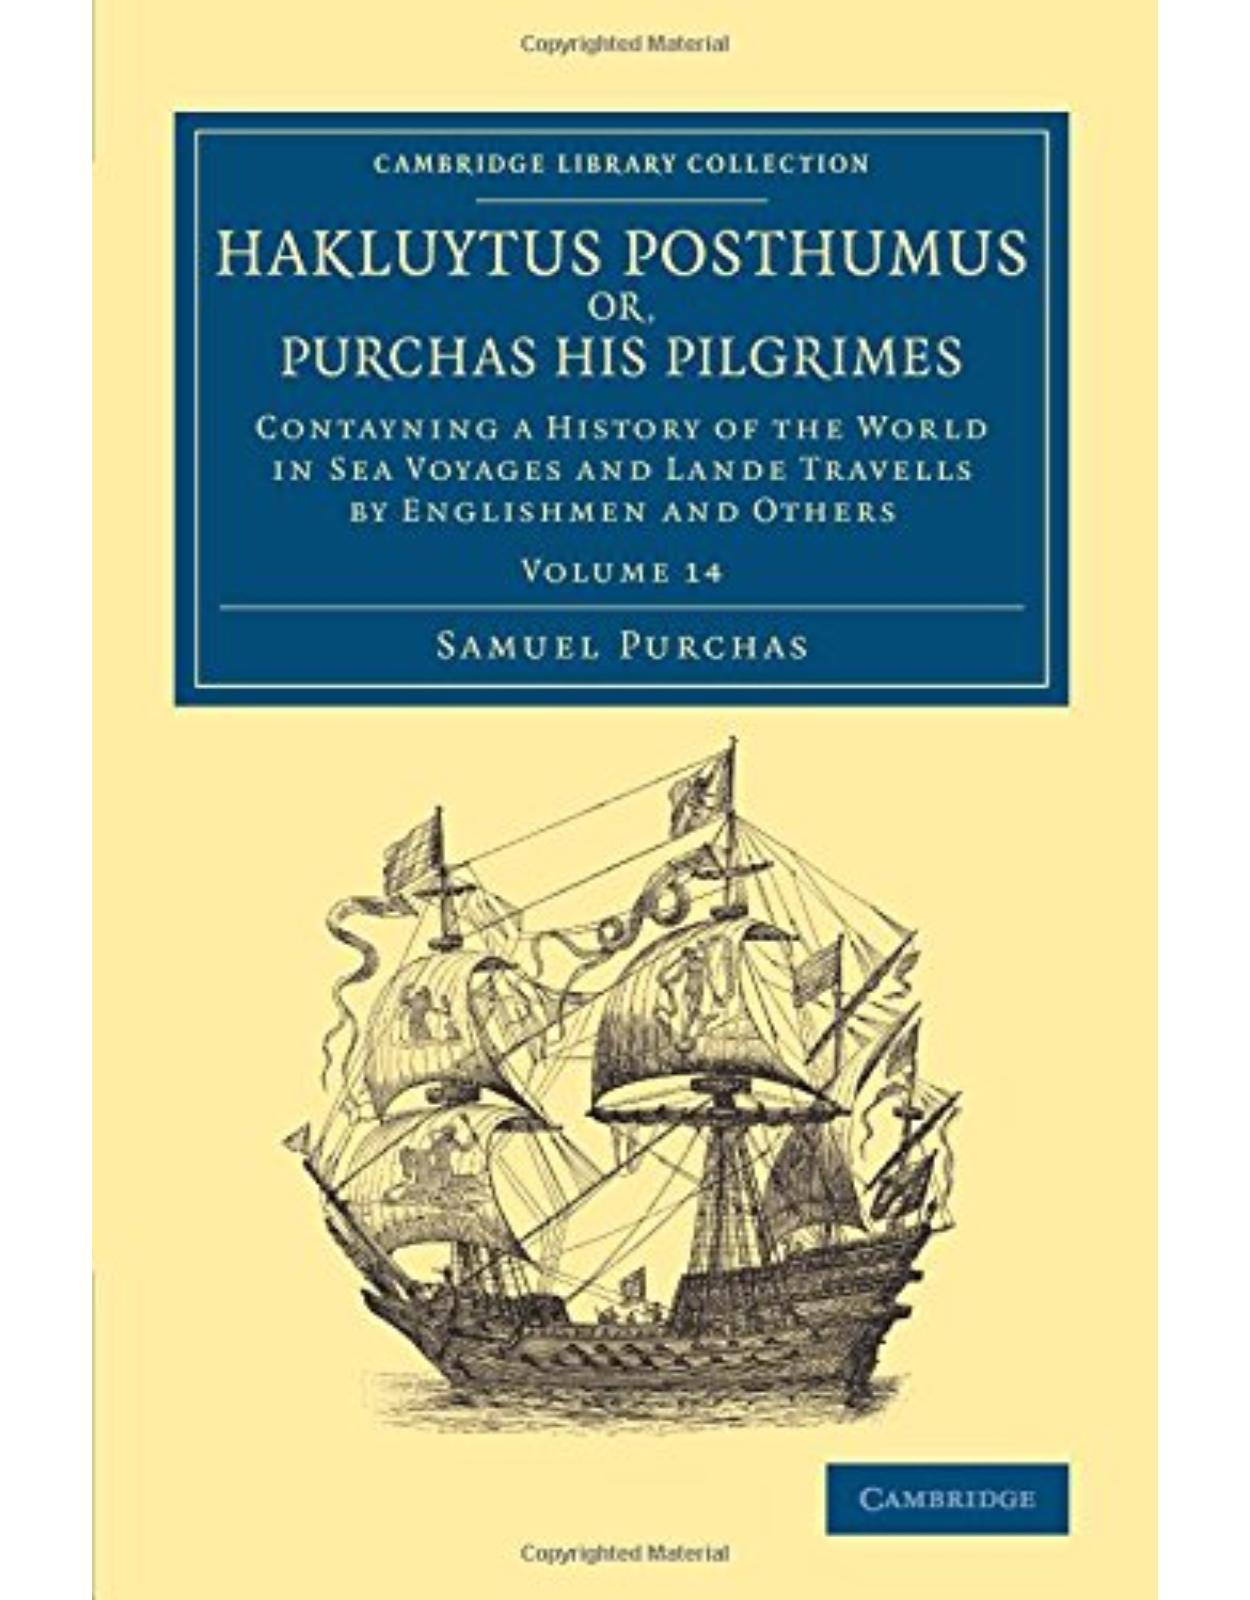 Hakluytus Posthumus or, Purchas his Pilgrimes: Contayning a History of the World in Sea Voyages and Lande Travells by Englishmen and Others (Volume 14)